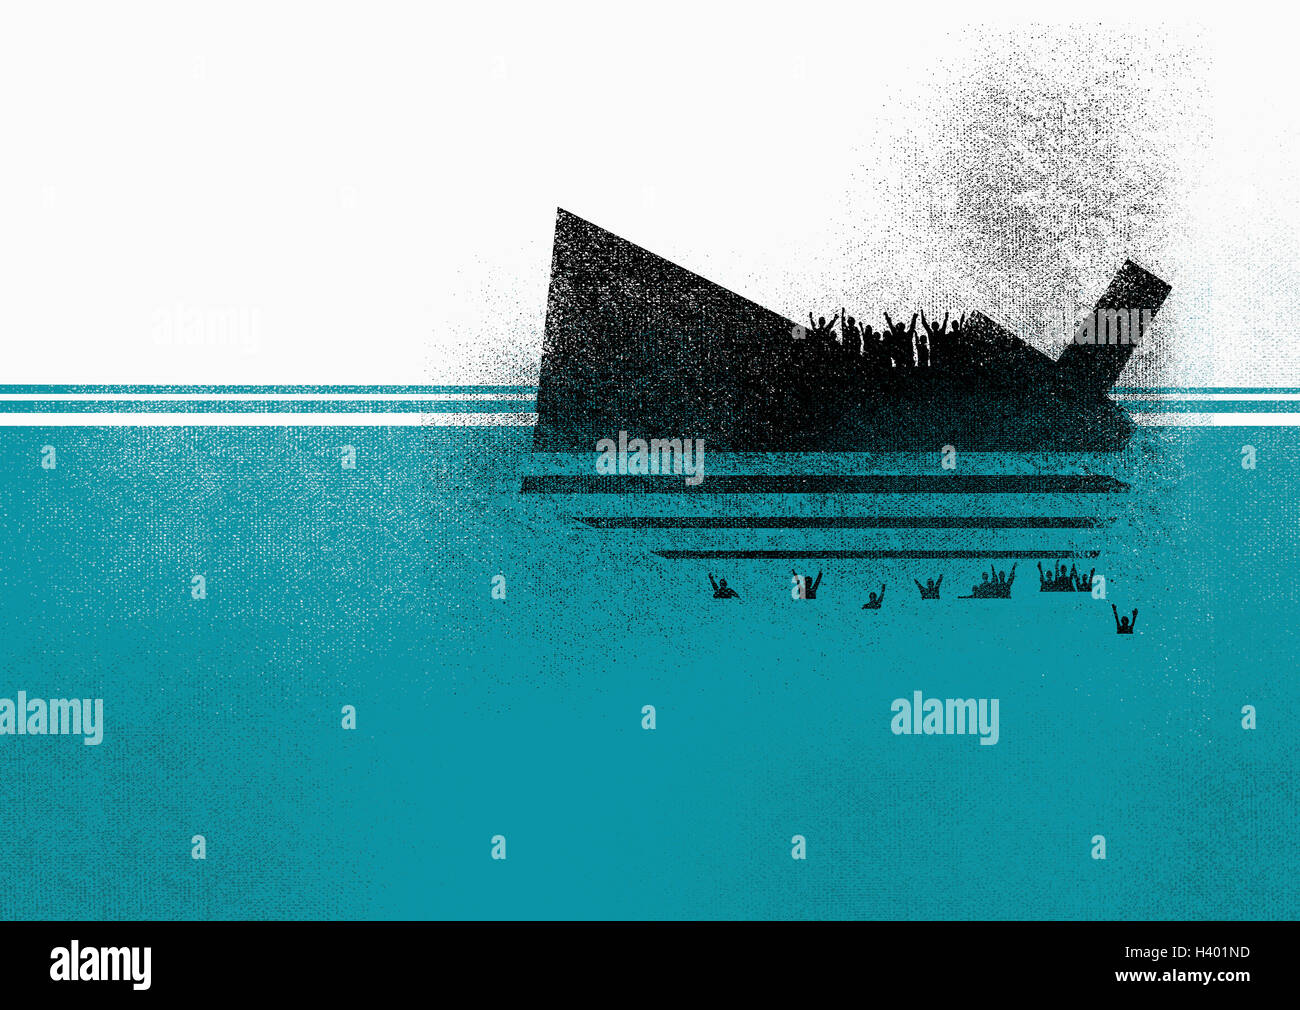 Illustration of sinking ship and people in sea Stock Photo